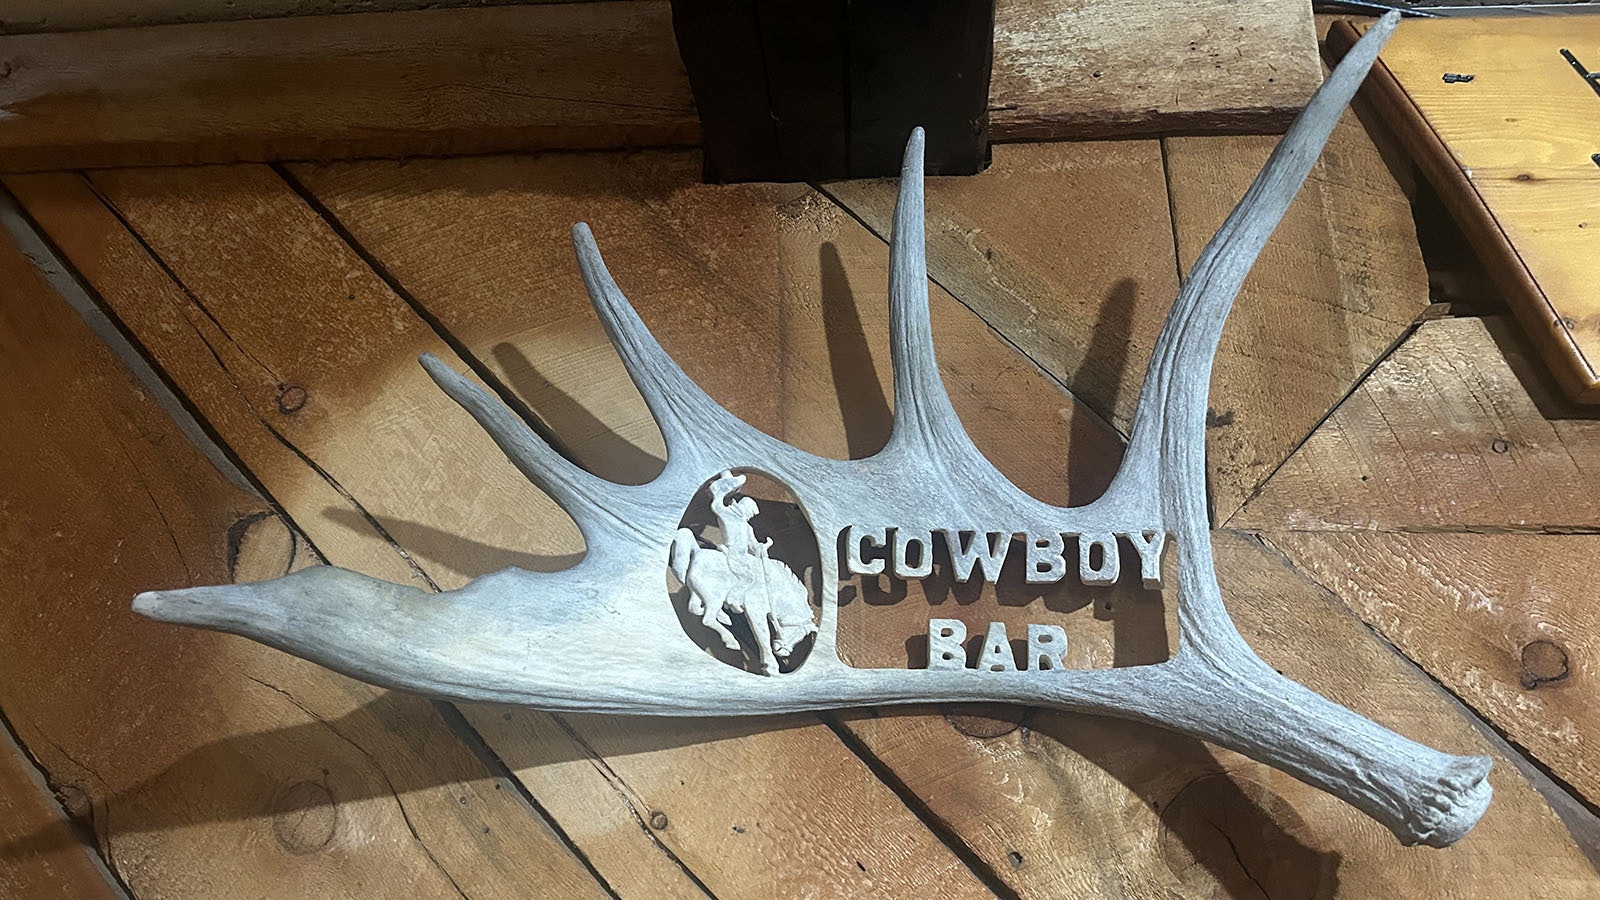 A moose antler carving in the Cowboy Bar in Pinedale.